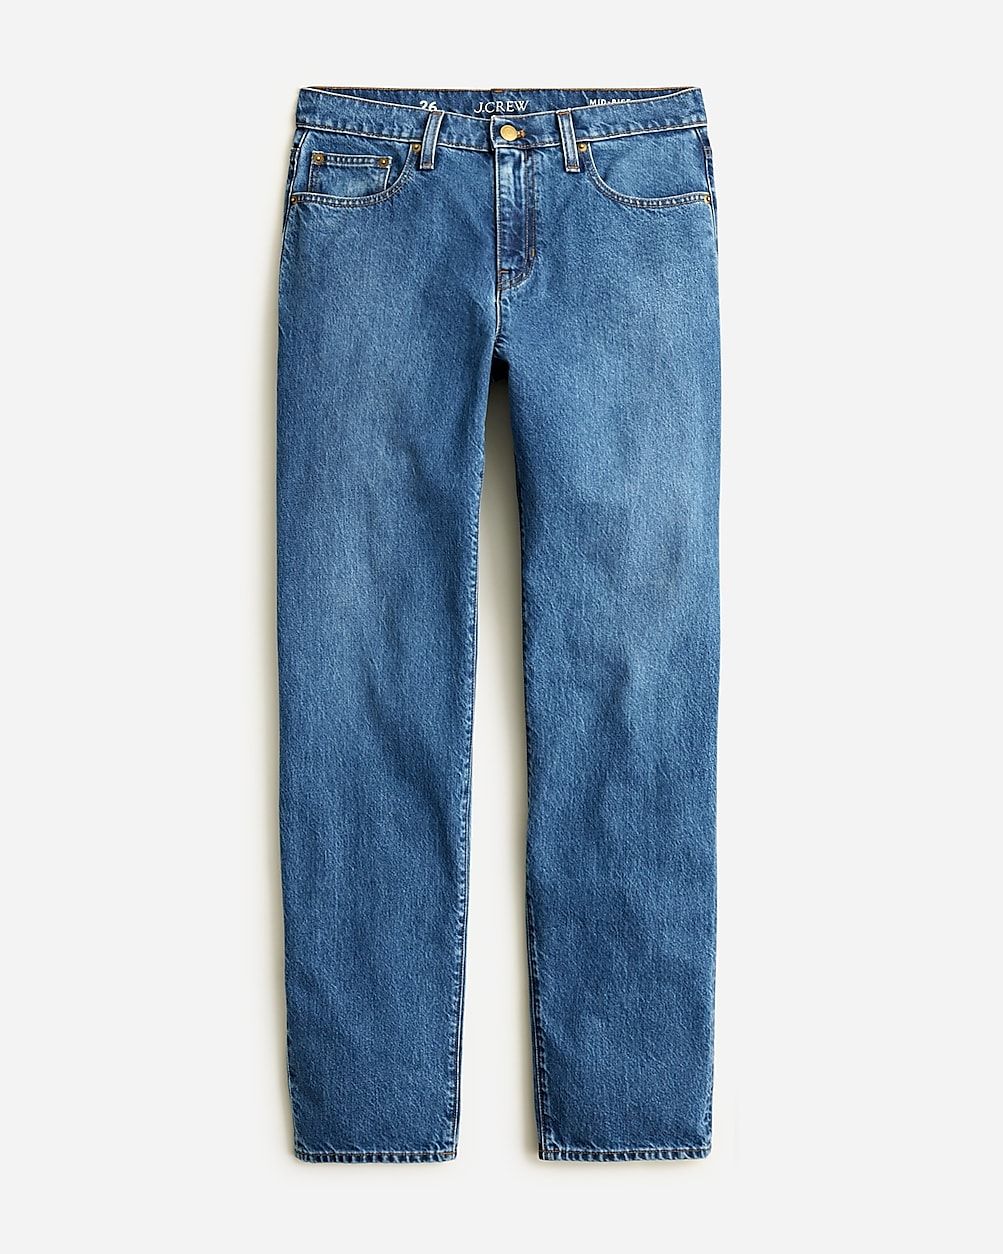 Petite slouchy-straight jean in Turney wash | J.Crew US